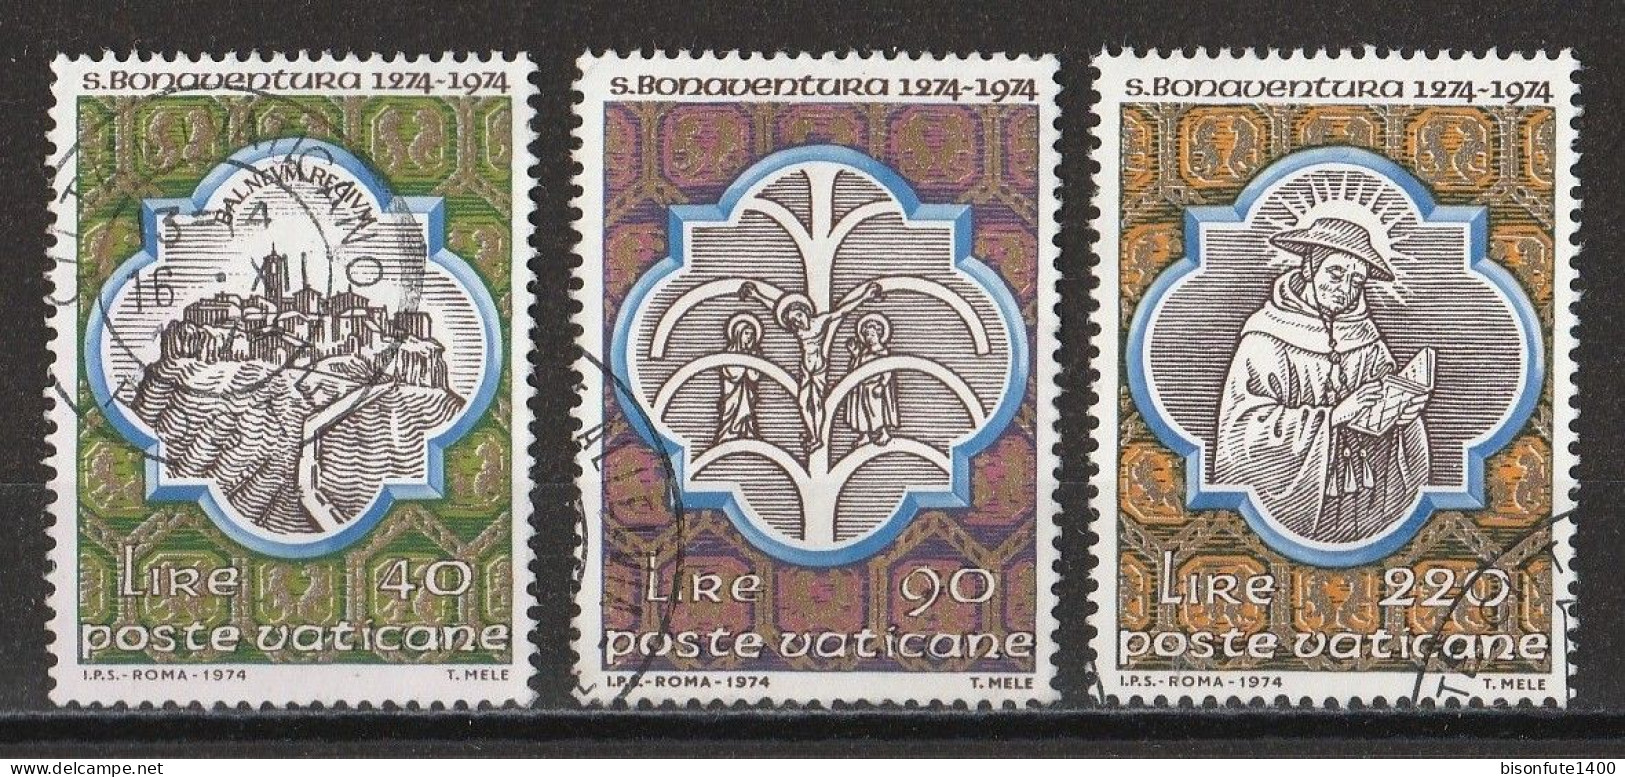 Vatican 1974 : Timbres Yvert & Tellier N° 569 - 570 - 571 - 572 - 573 - 574 - 575 - 576 - 577 Et 578 Se Tenant - 579 -.. - Used Stamps